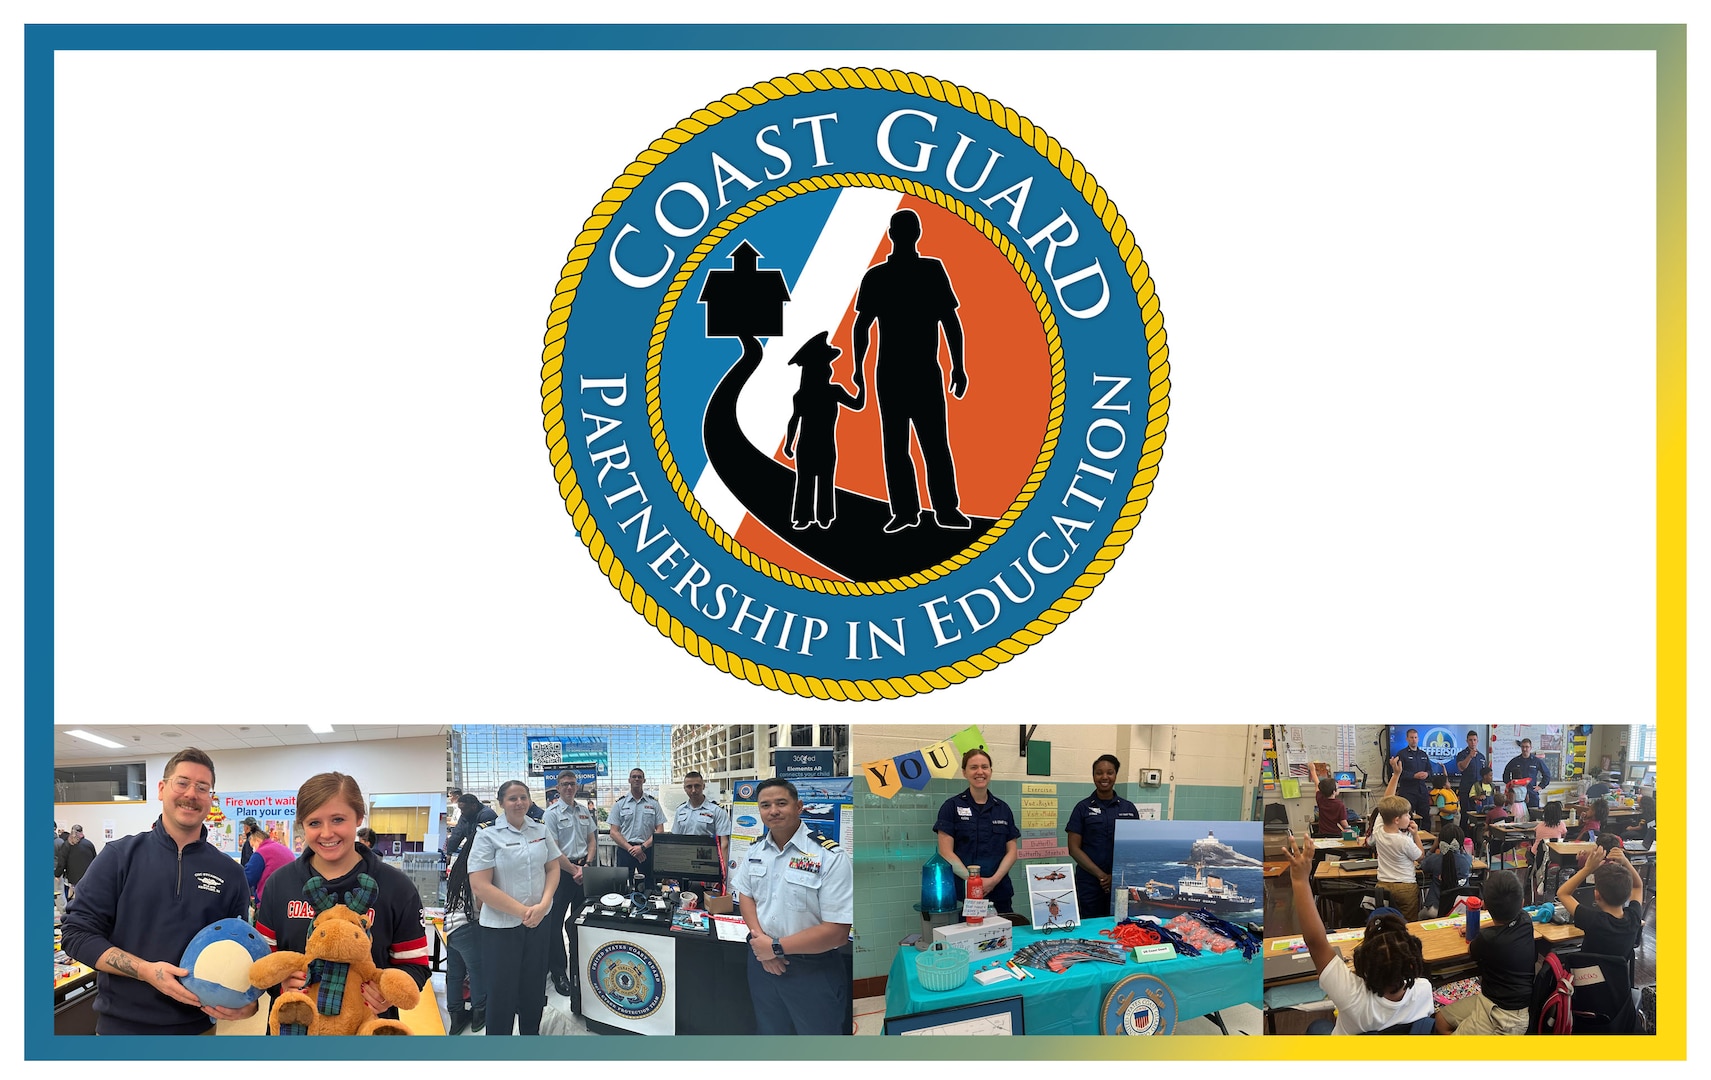 An image with a Coast Guard Partnership In Education logo on the top half, on the bottom half is 4 photos of equal size showcasing various events where PIE was present.